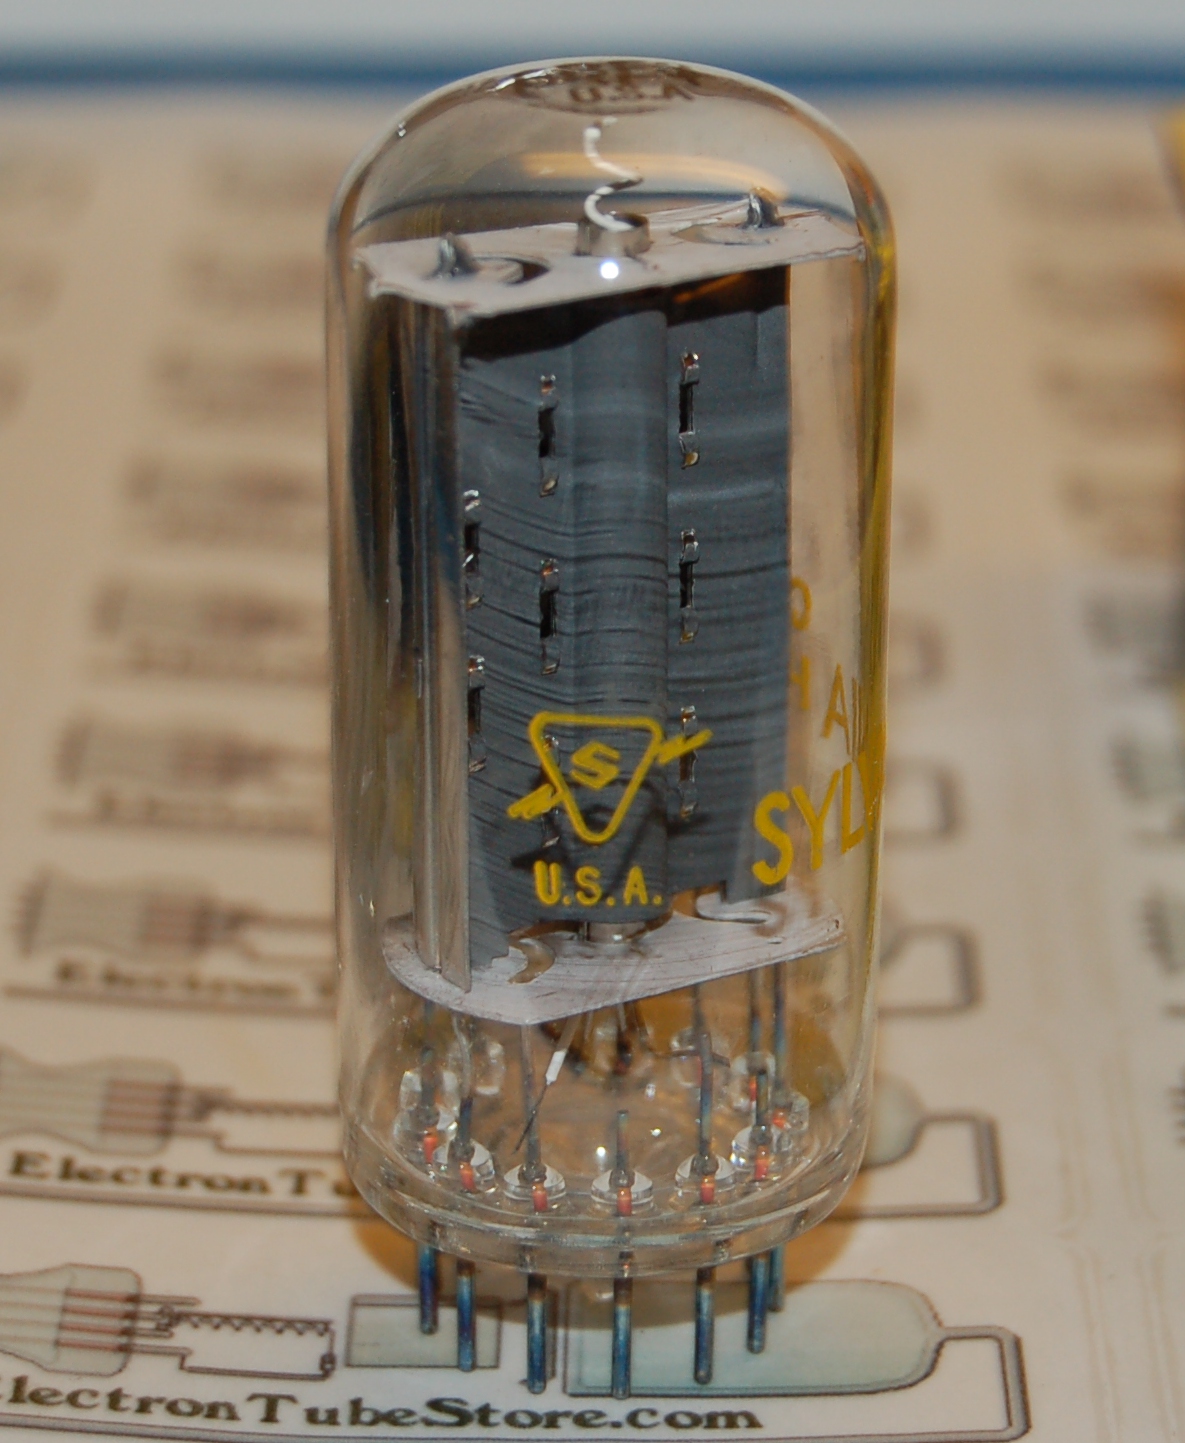 6BE3 power rectifier diode tube